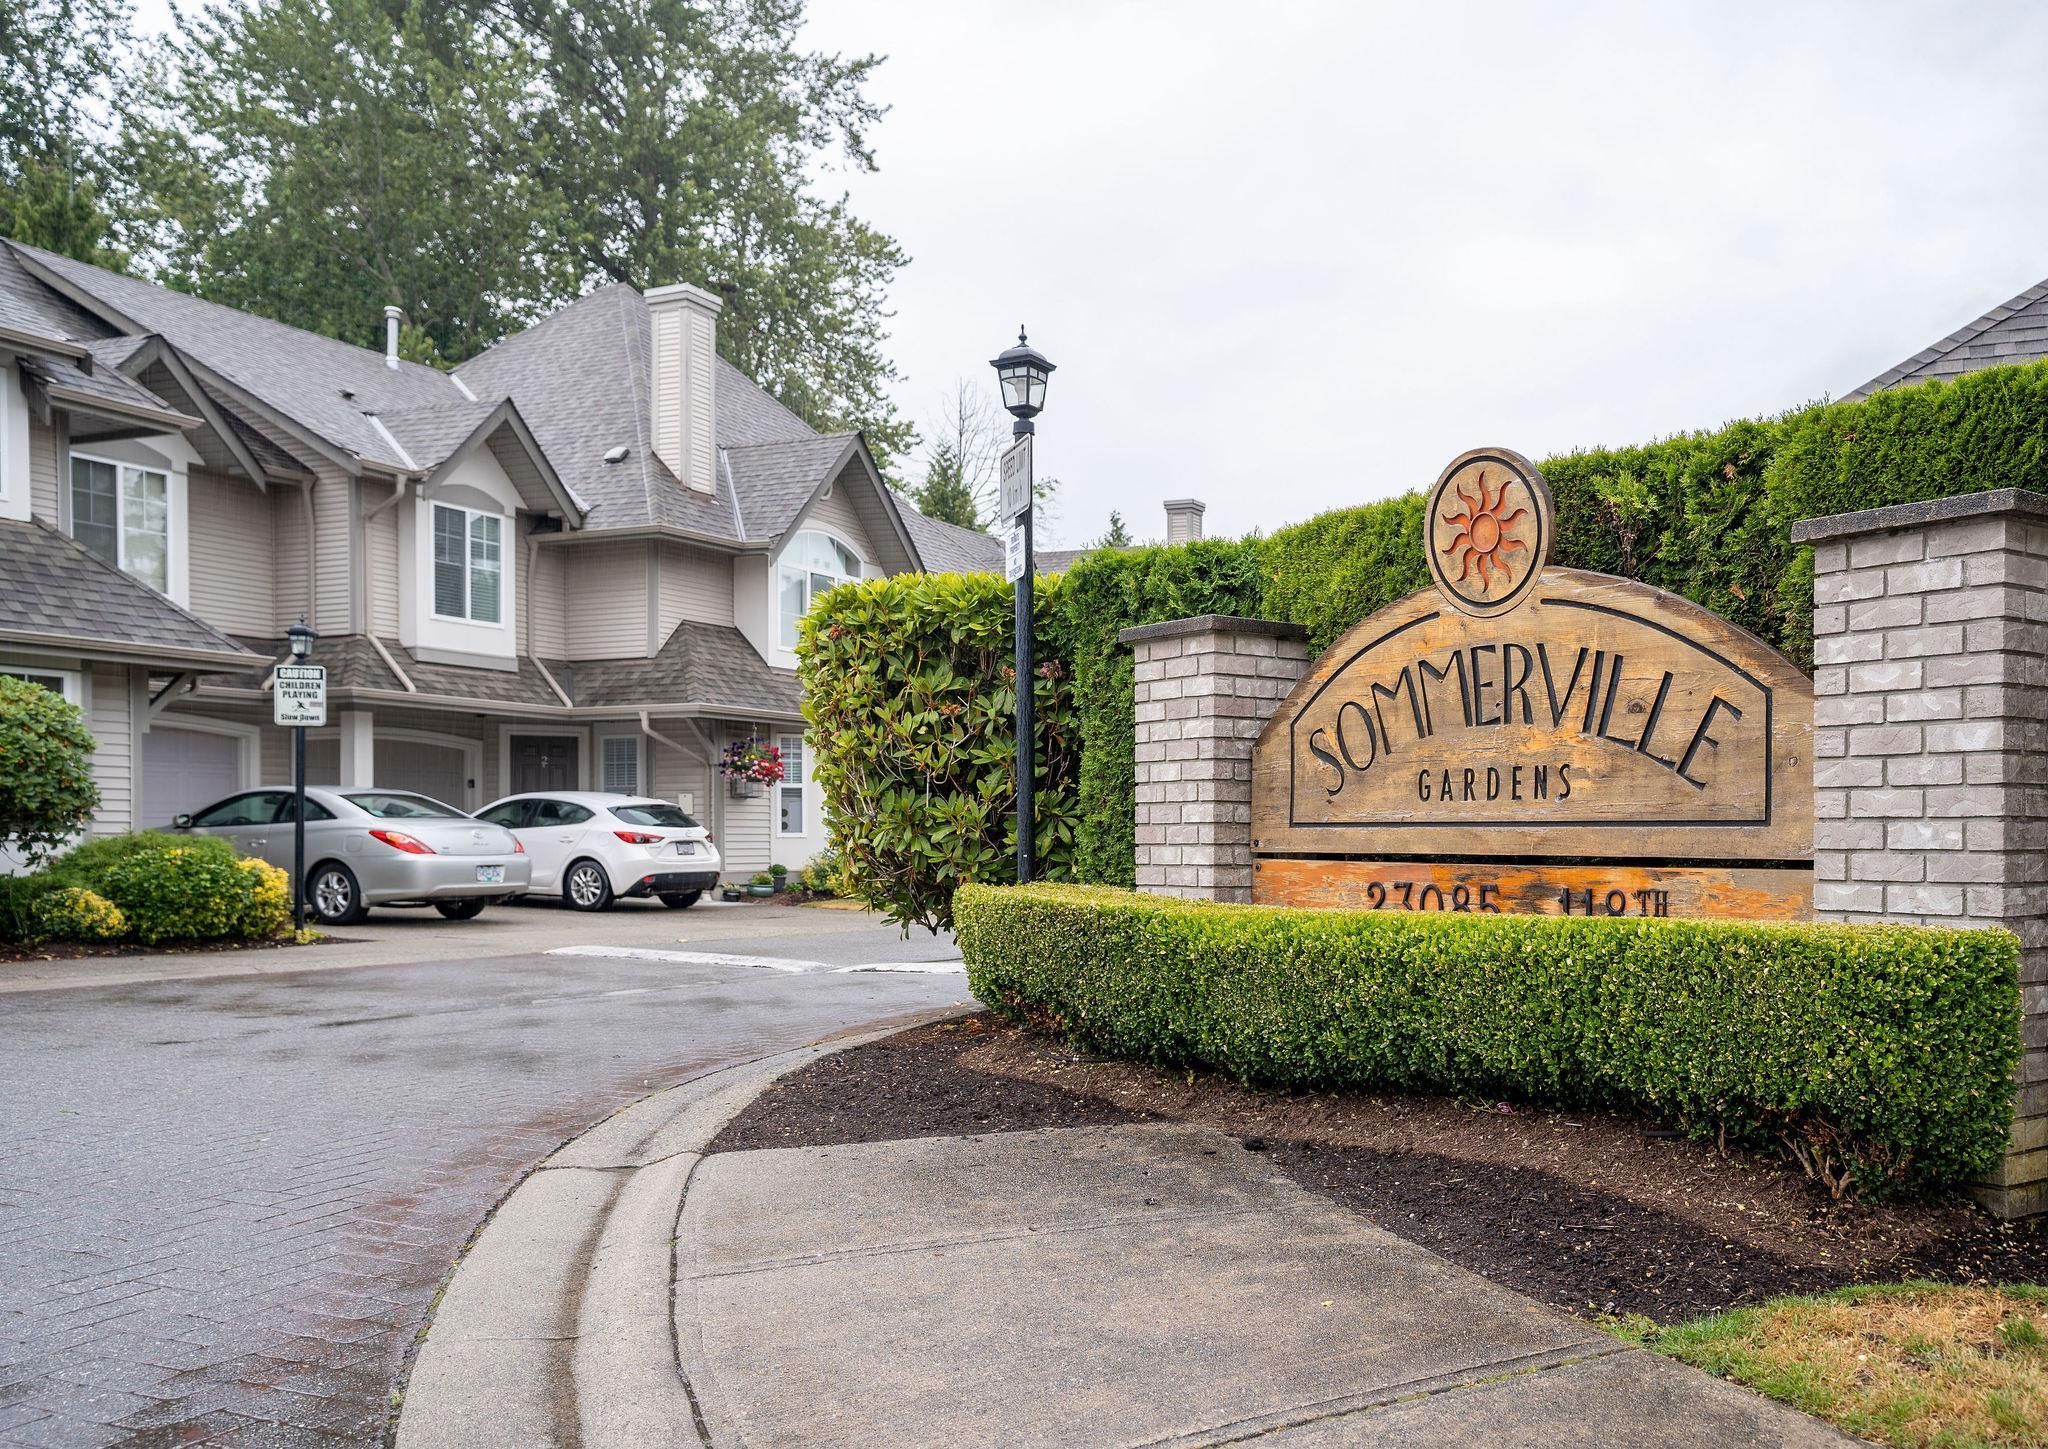 Open House on Saturday, June 24, 2023 11:00AM - 1:00PM
This is the buy that Buyers dream of finding.  Great townhome just awaiting a Buyers personal decor touches.  If you're a serious qualified Buyer, THIS IS A VERY DEFINITE MUST SEE!   Come & see fo